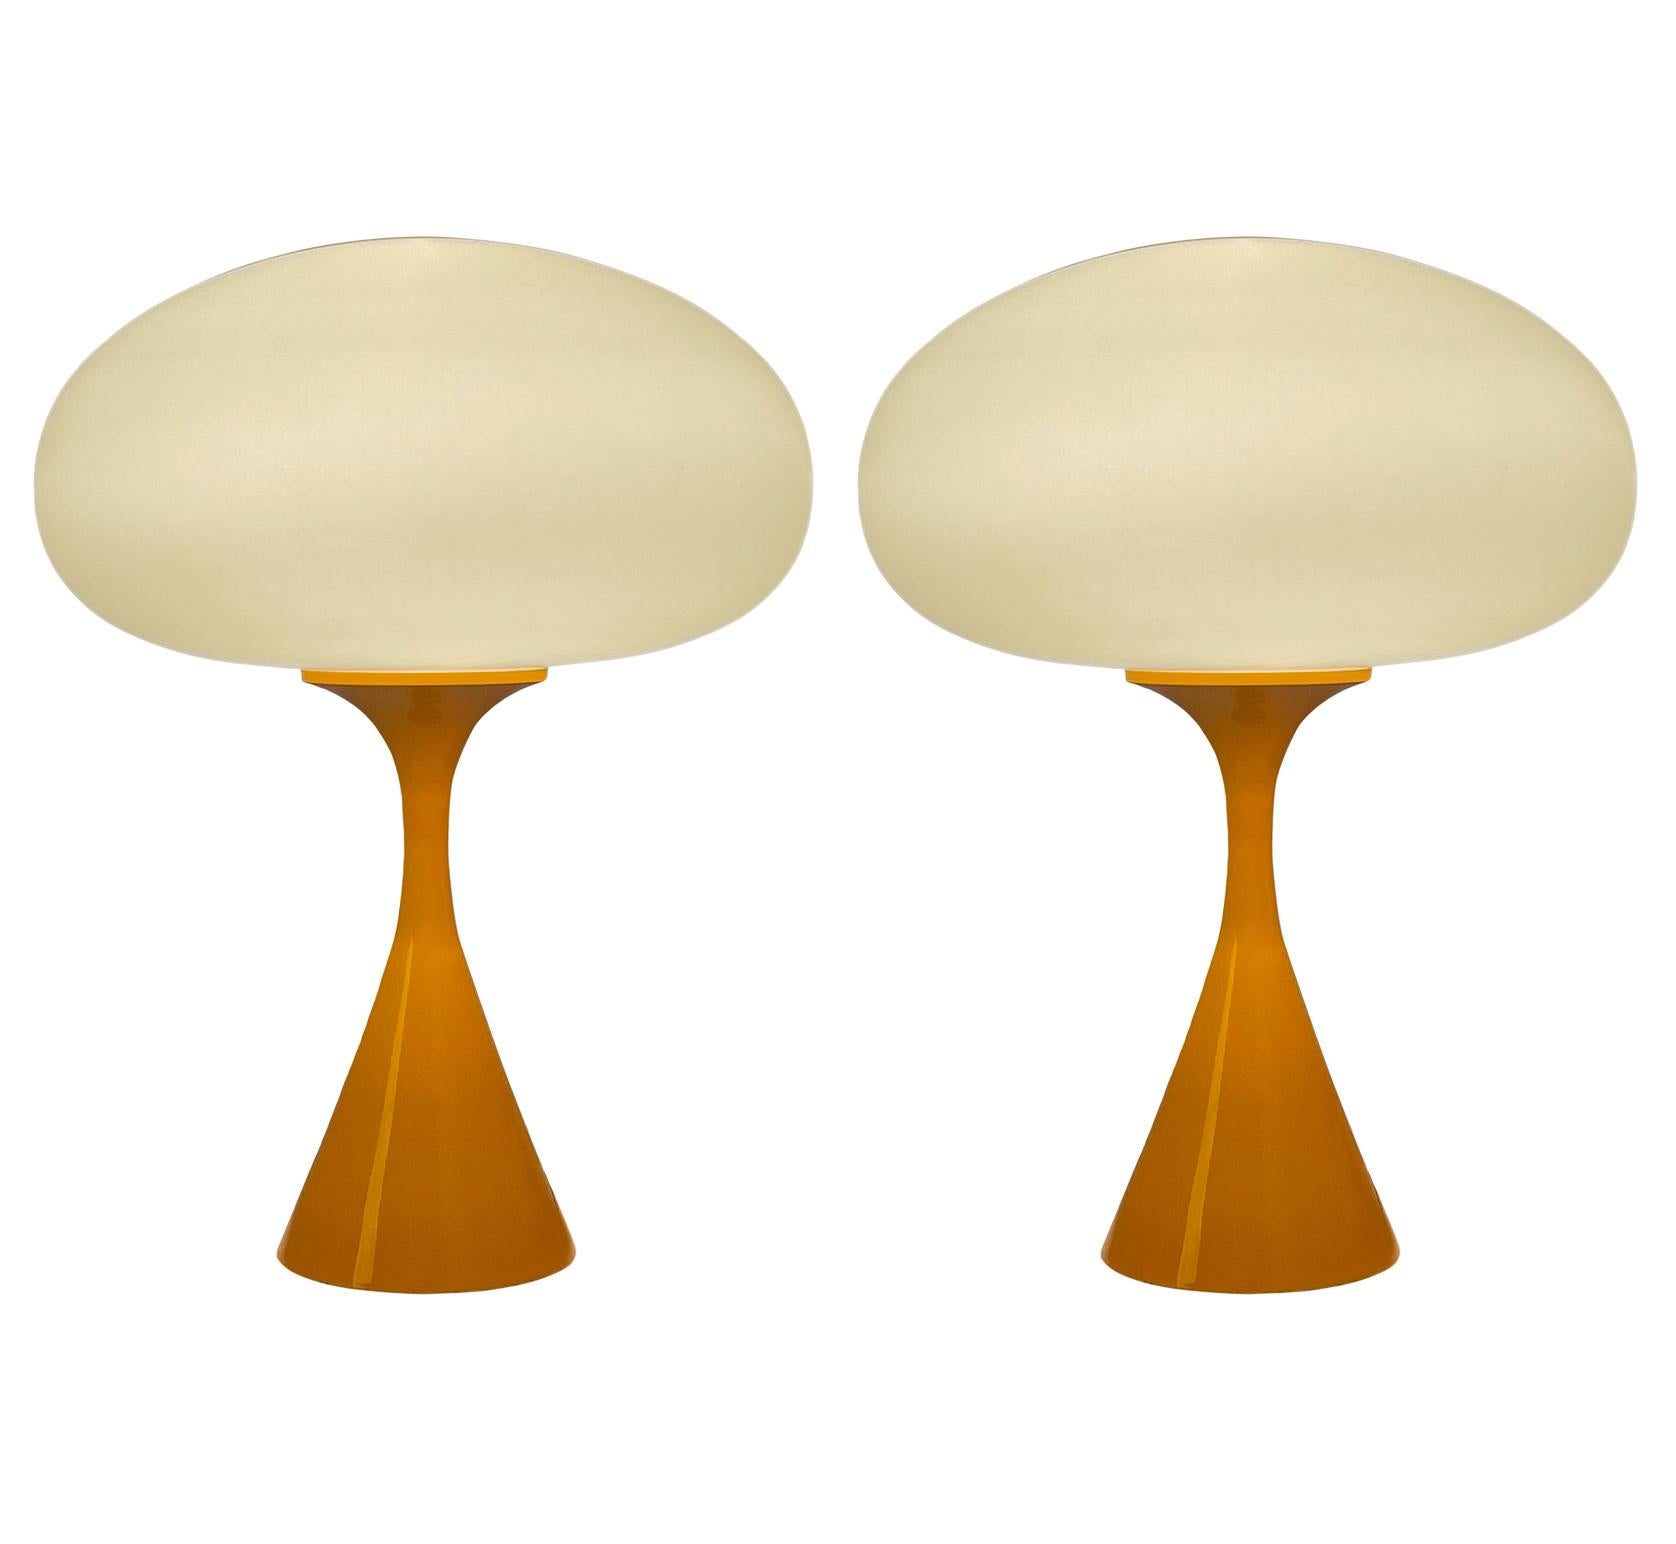 A handsome matching pair of table lamps in a conical mushroom form after Laurel Lamp Company. The lamp features a cast aluminum base with an orange powder coat and a mouth blown frosted glass lamp shade. Price includes the pair as shown.